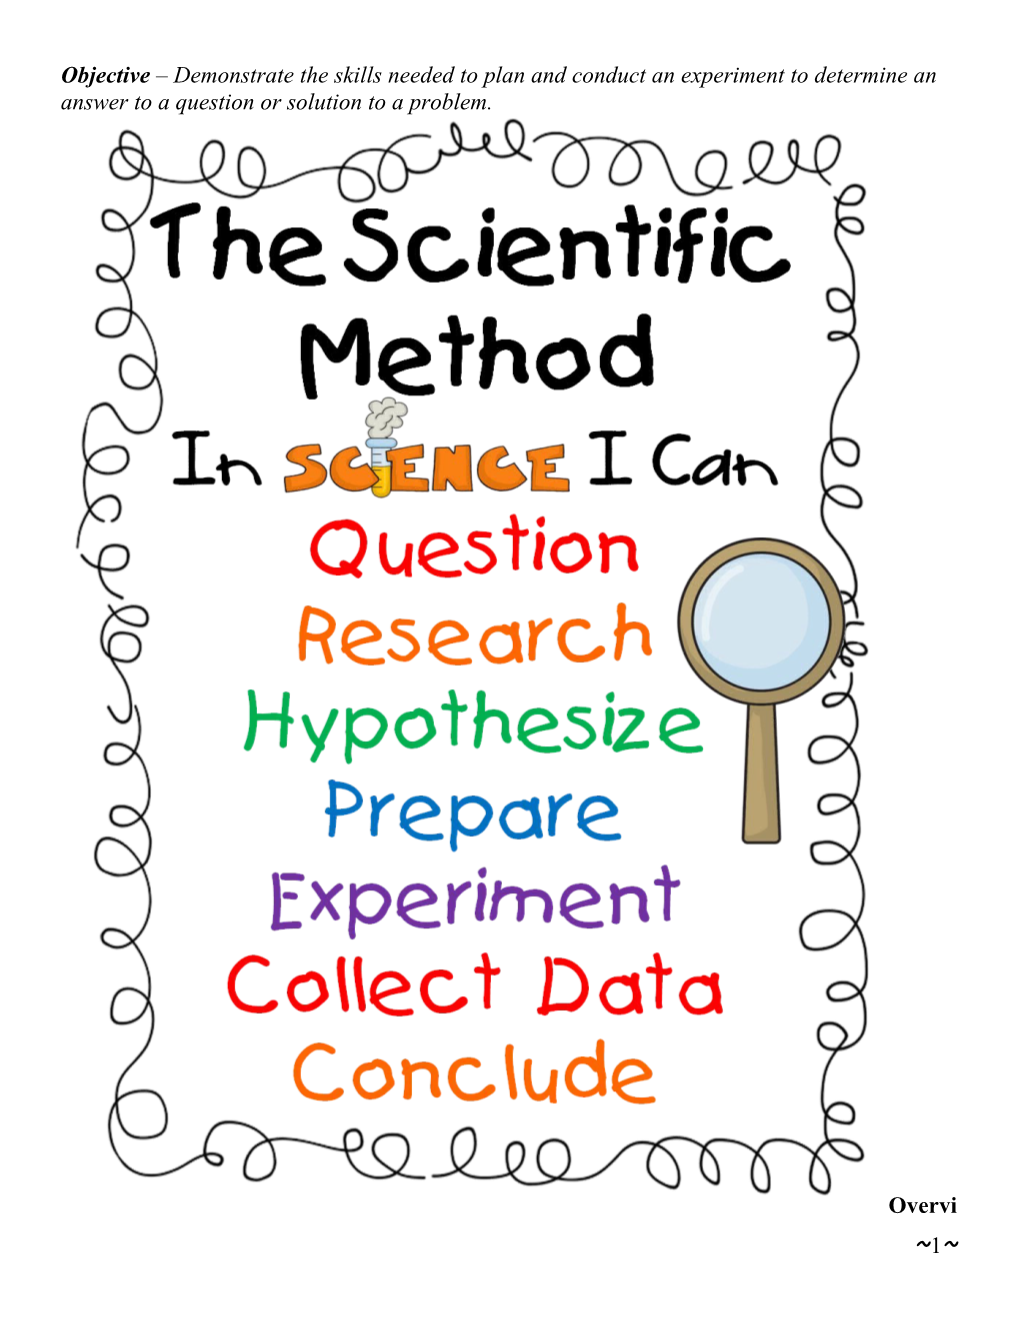 Objective Demonstrate the Skills Needed to Plan and Conduct an Experiment to Determine